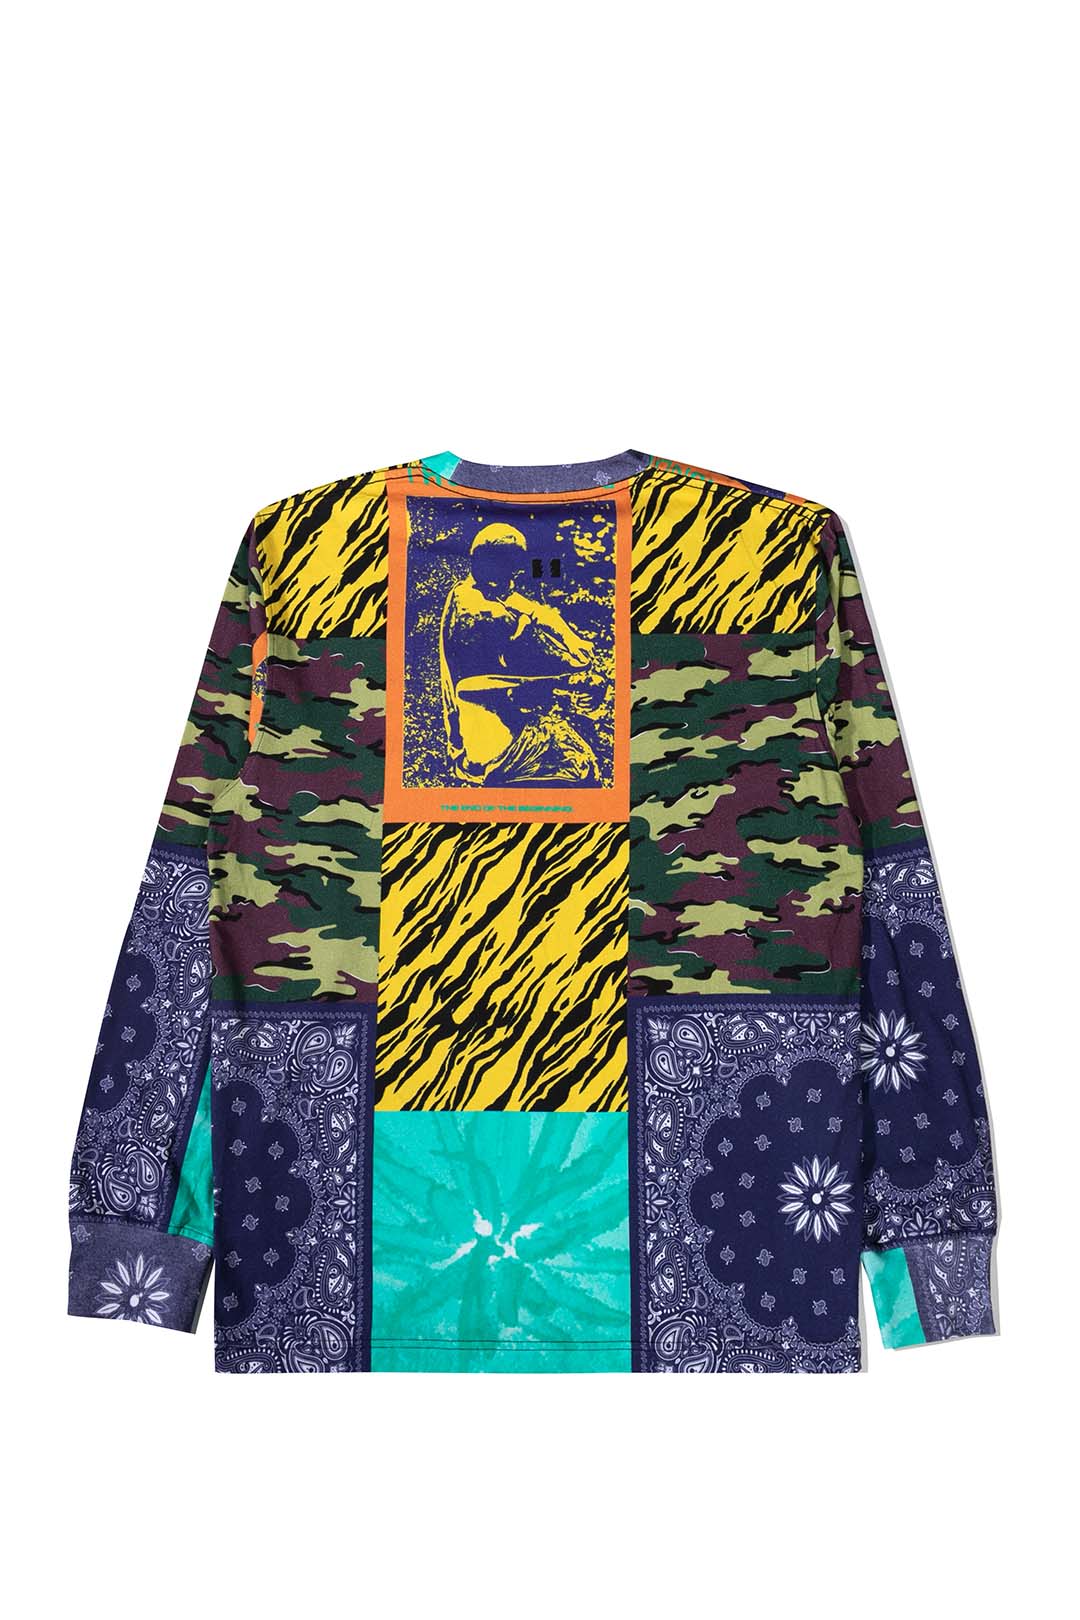 The Hundreds Collage Ls Tshirt - Multi